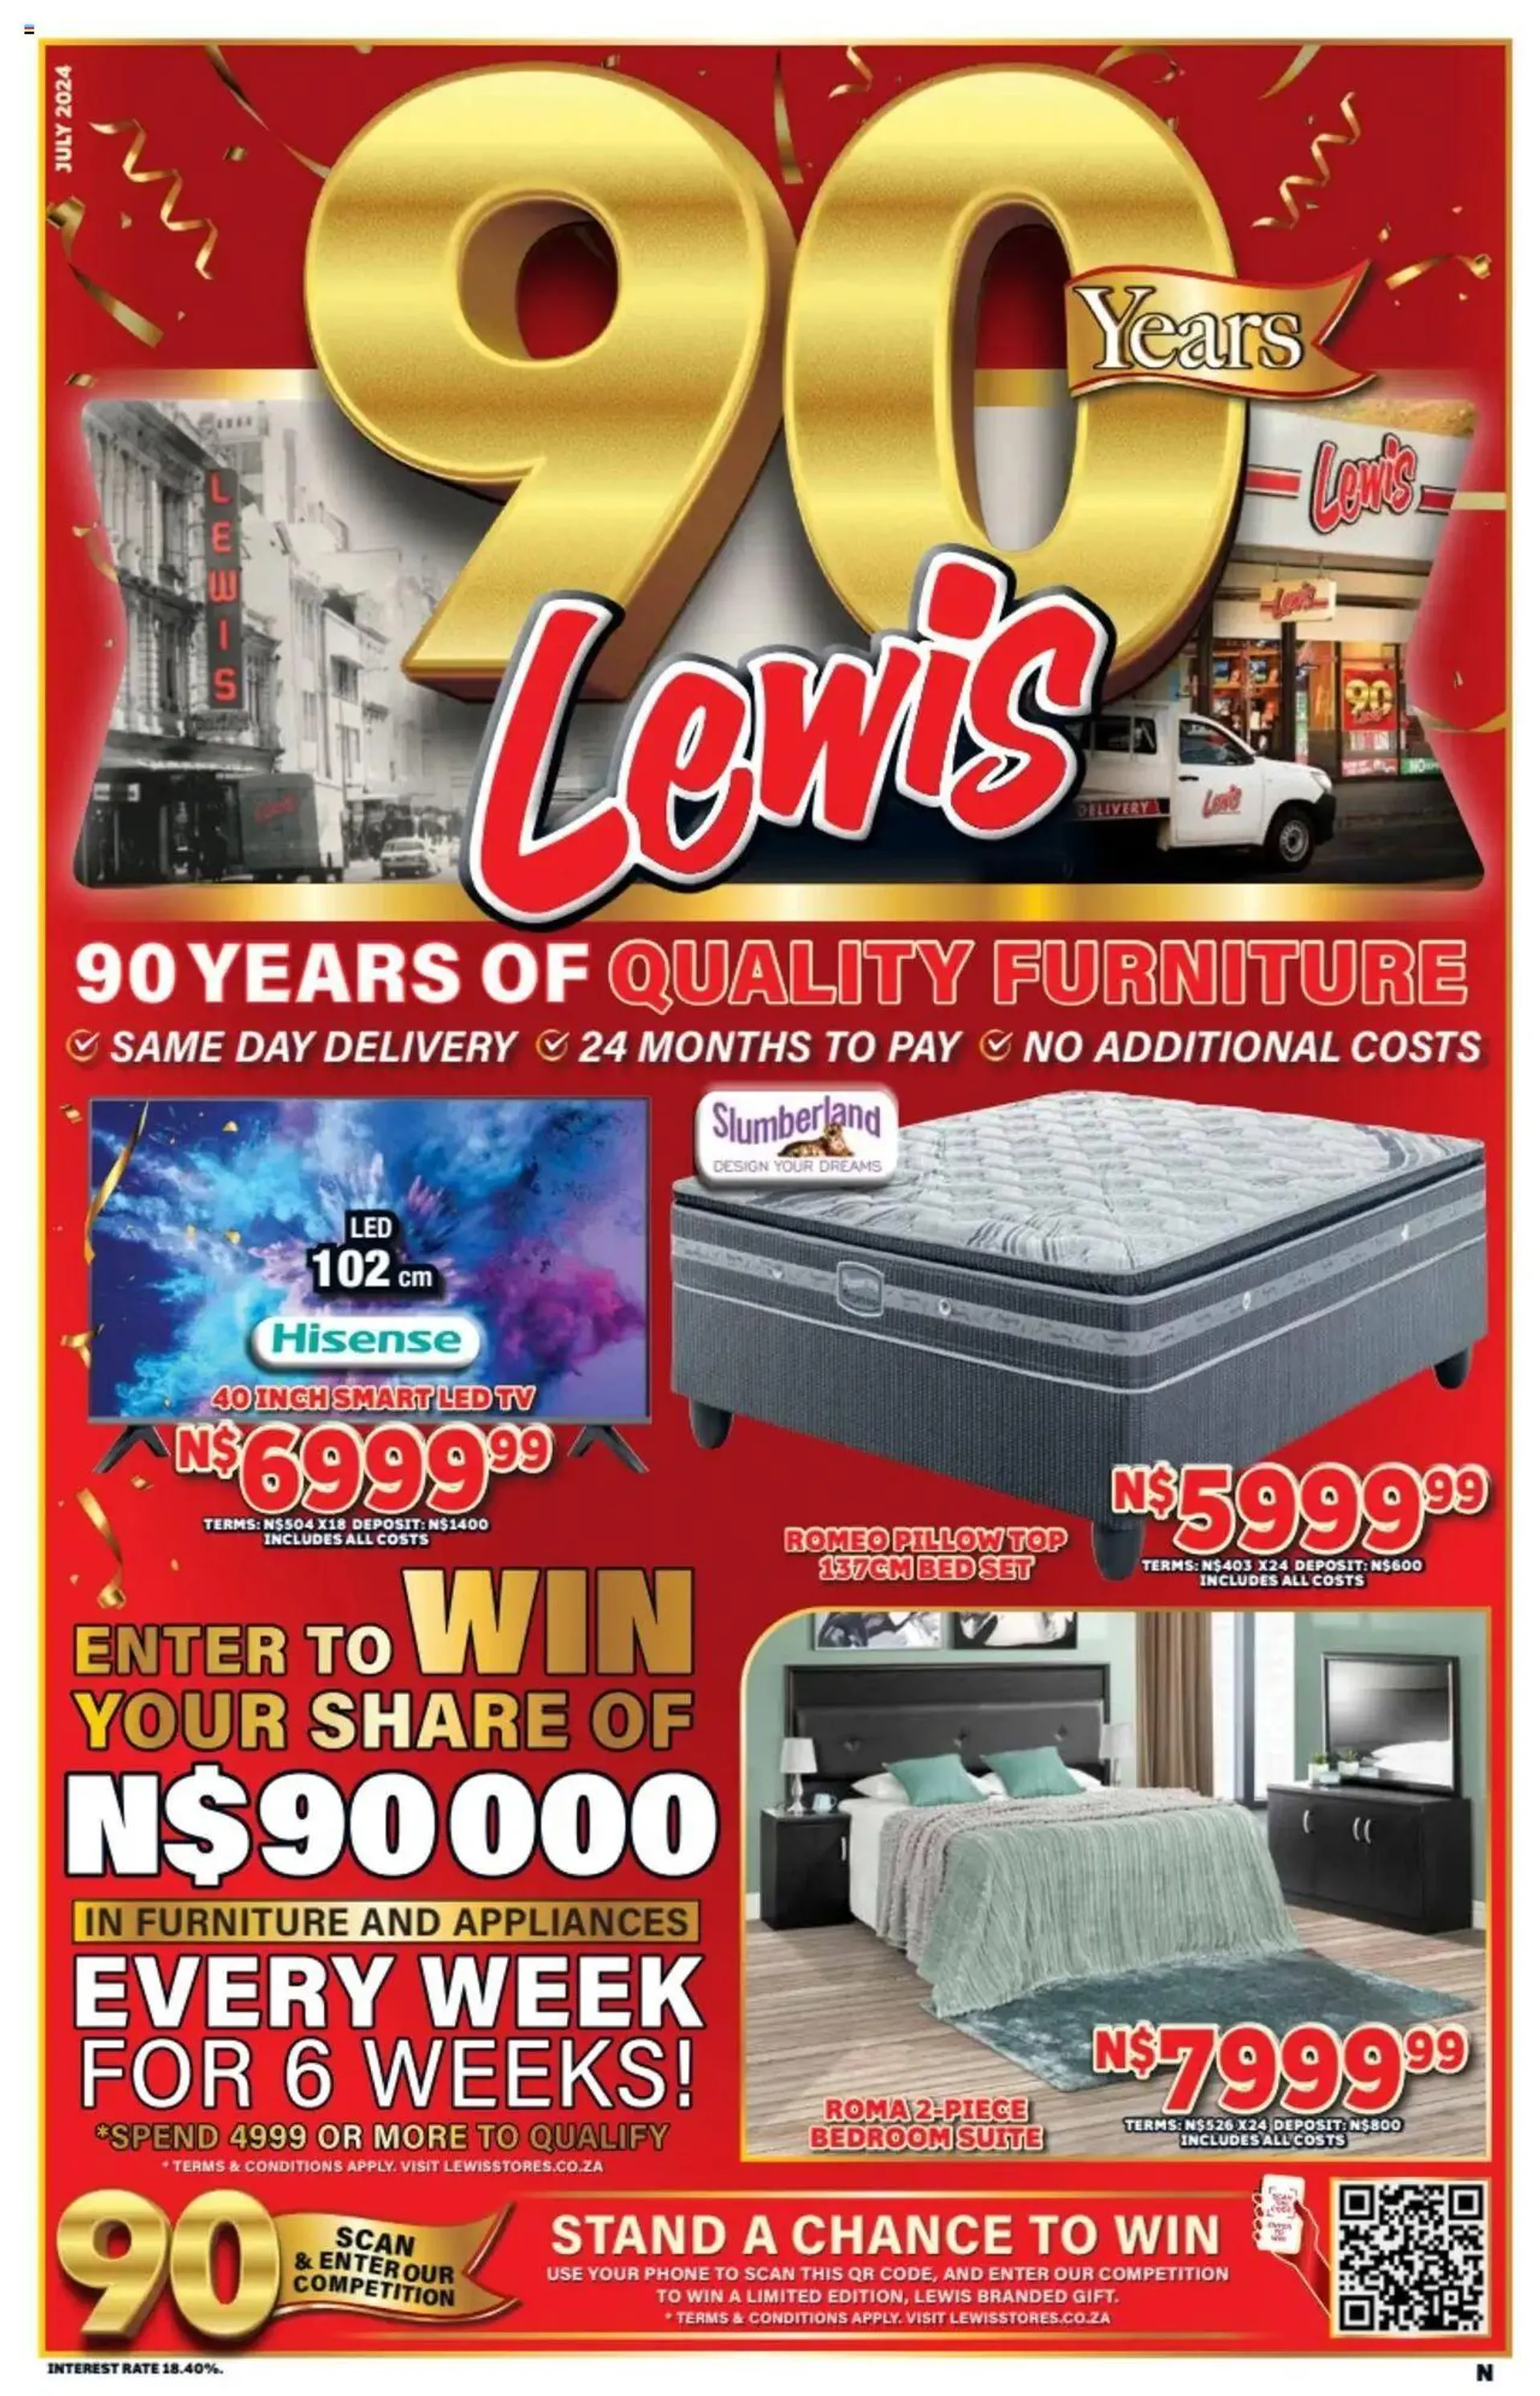 Lewis Stores - Namibia Brochure - 0